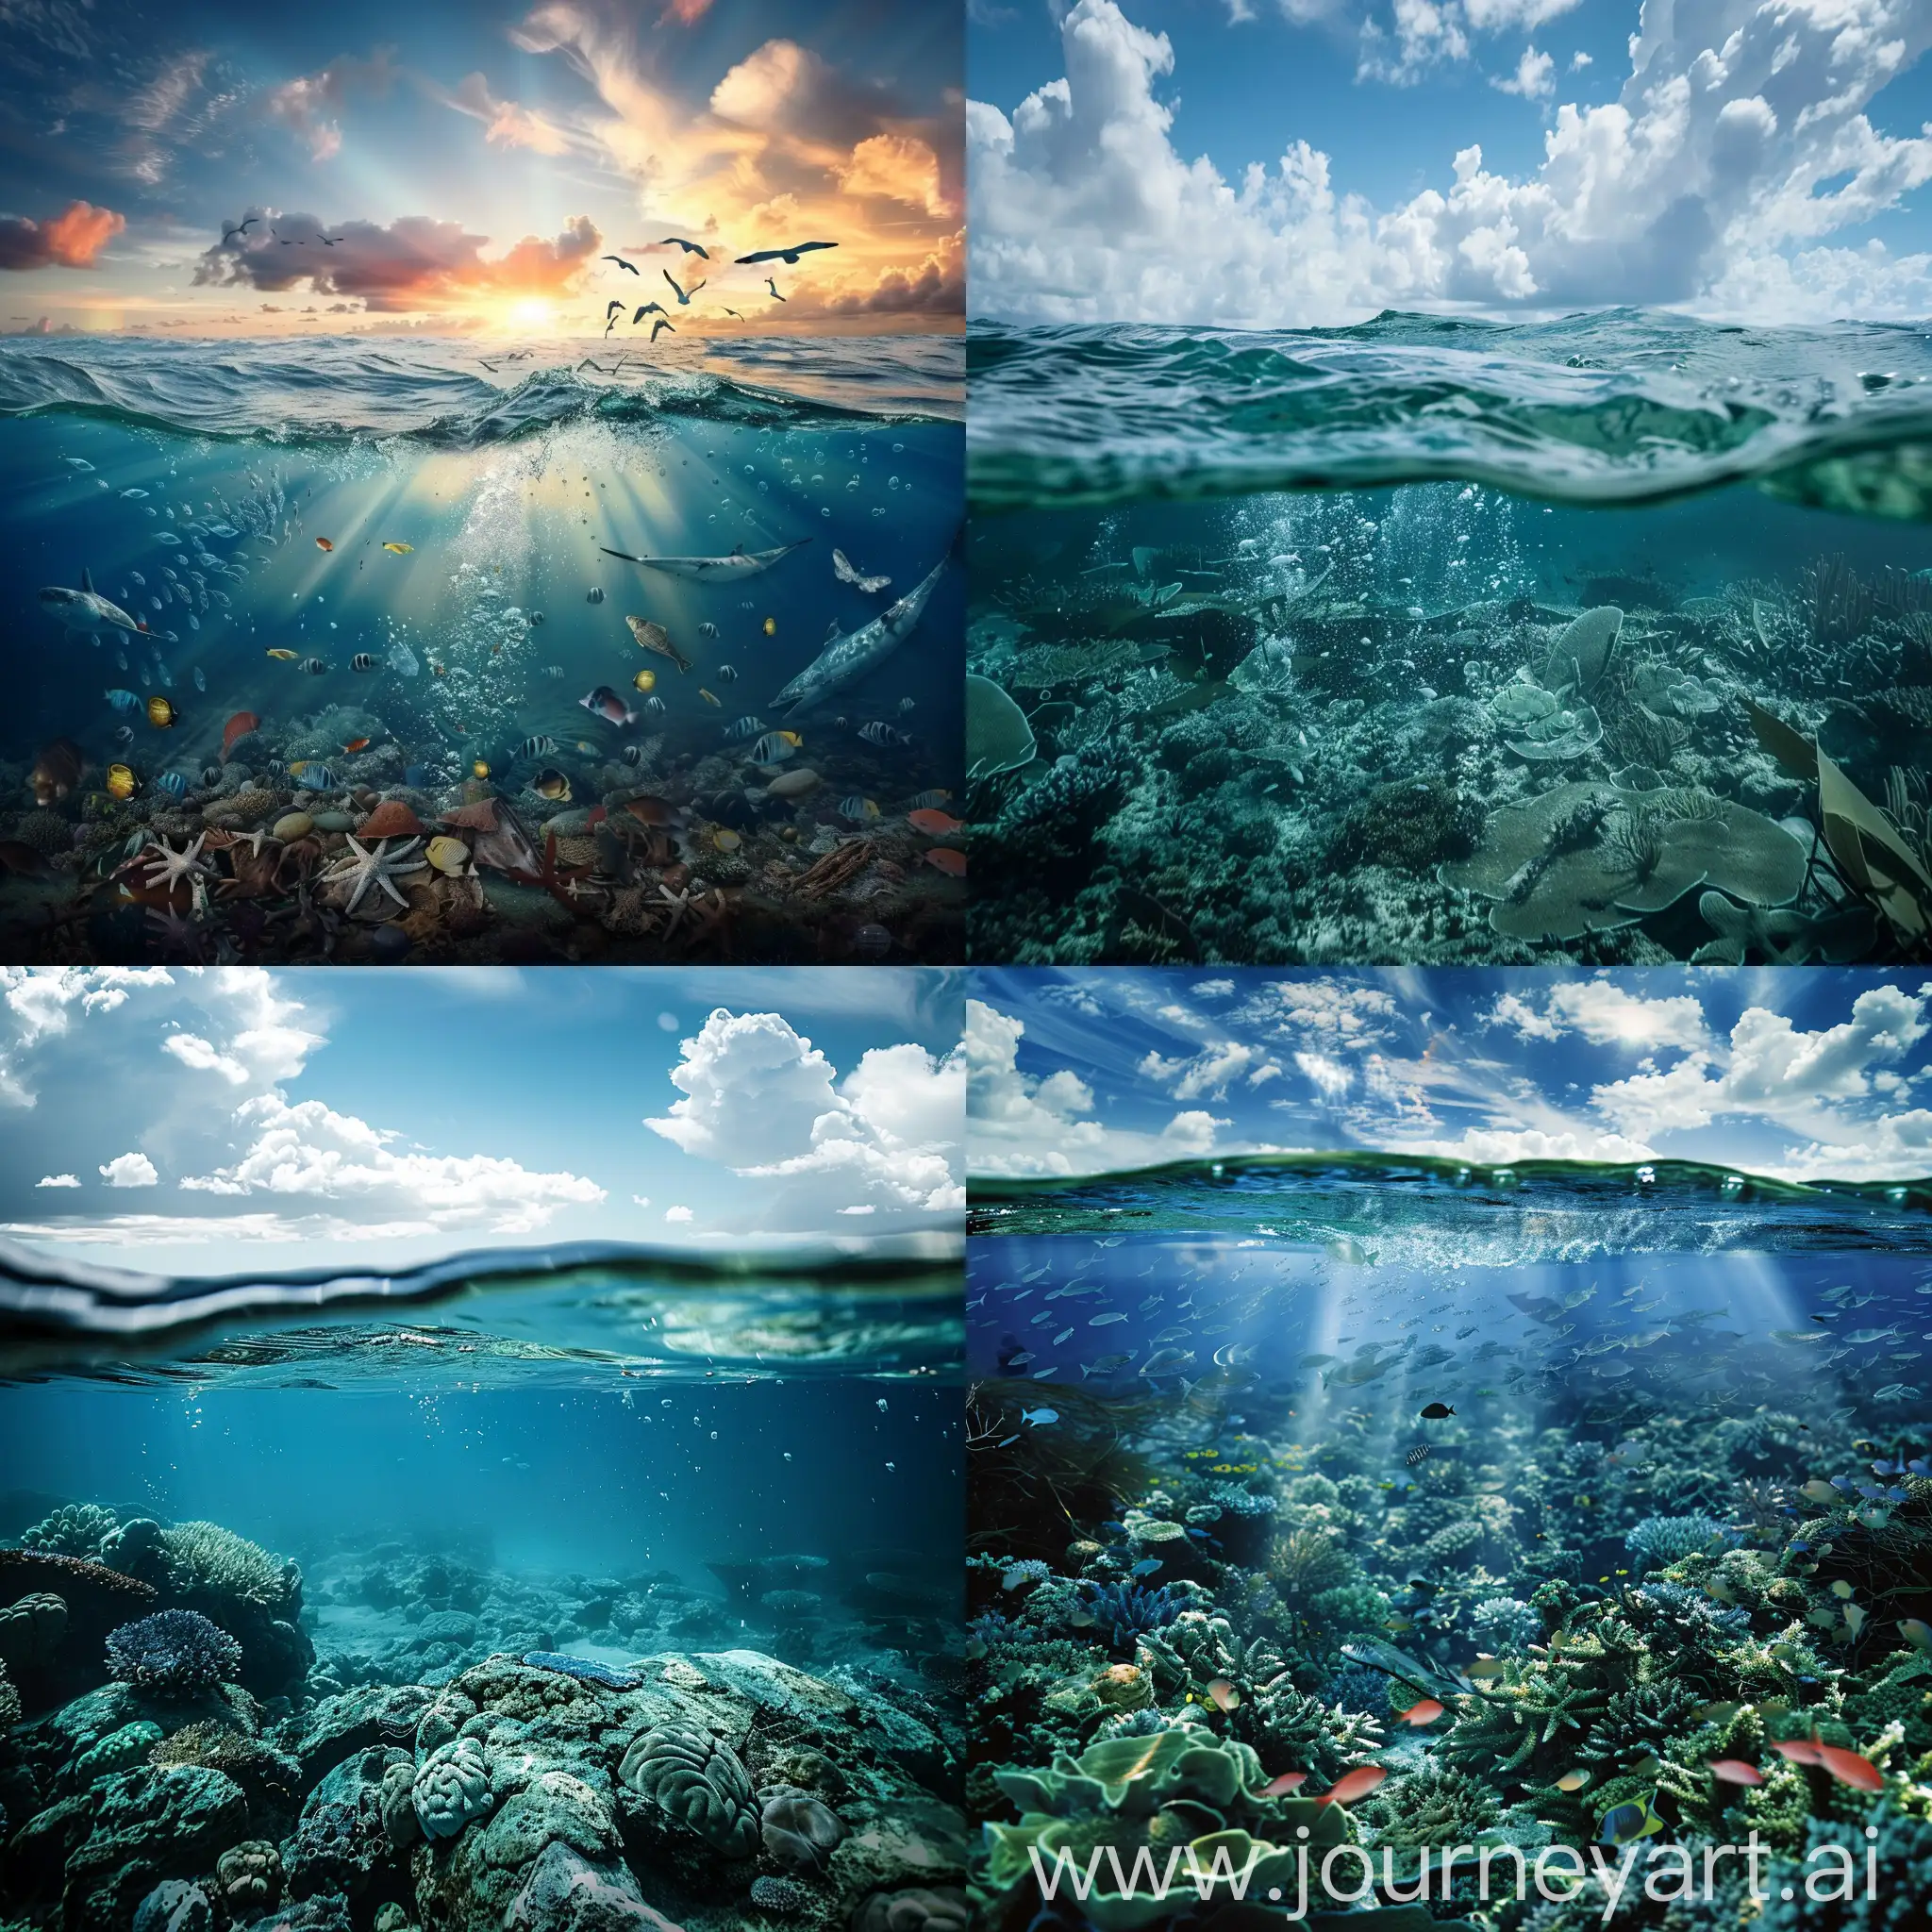 Human-Impact-on-Oceans-A-Visual-Exploration-of-Worldwide-Water-Resource-Threats